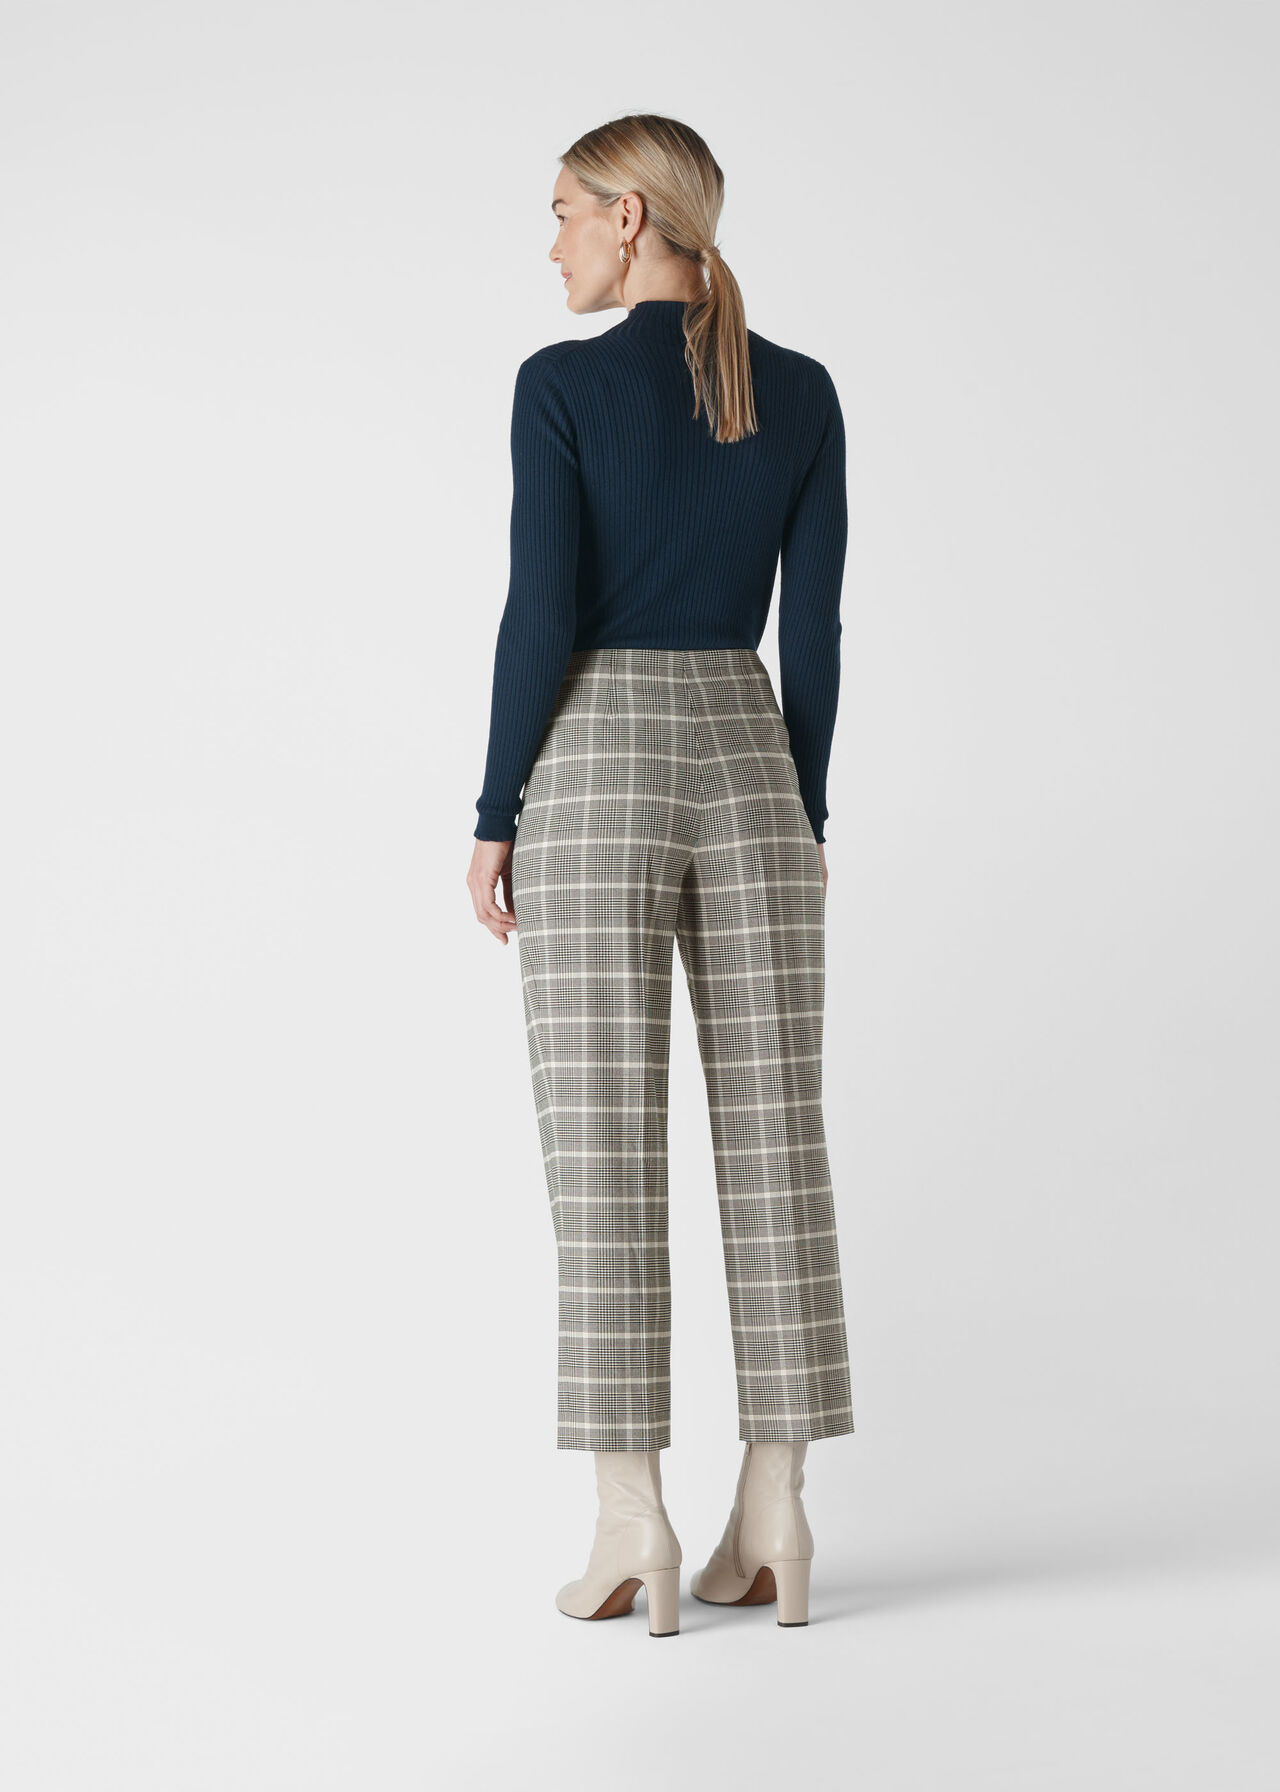 Black And White Courtney Check Trouser | WHISTLES